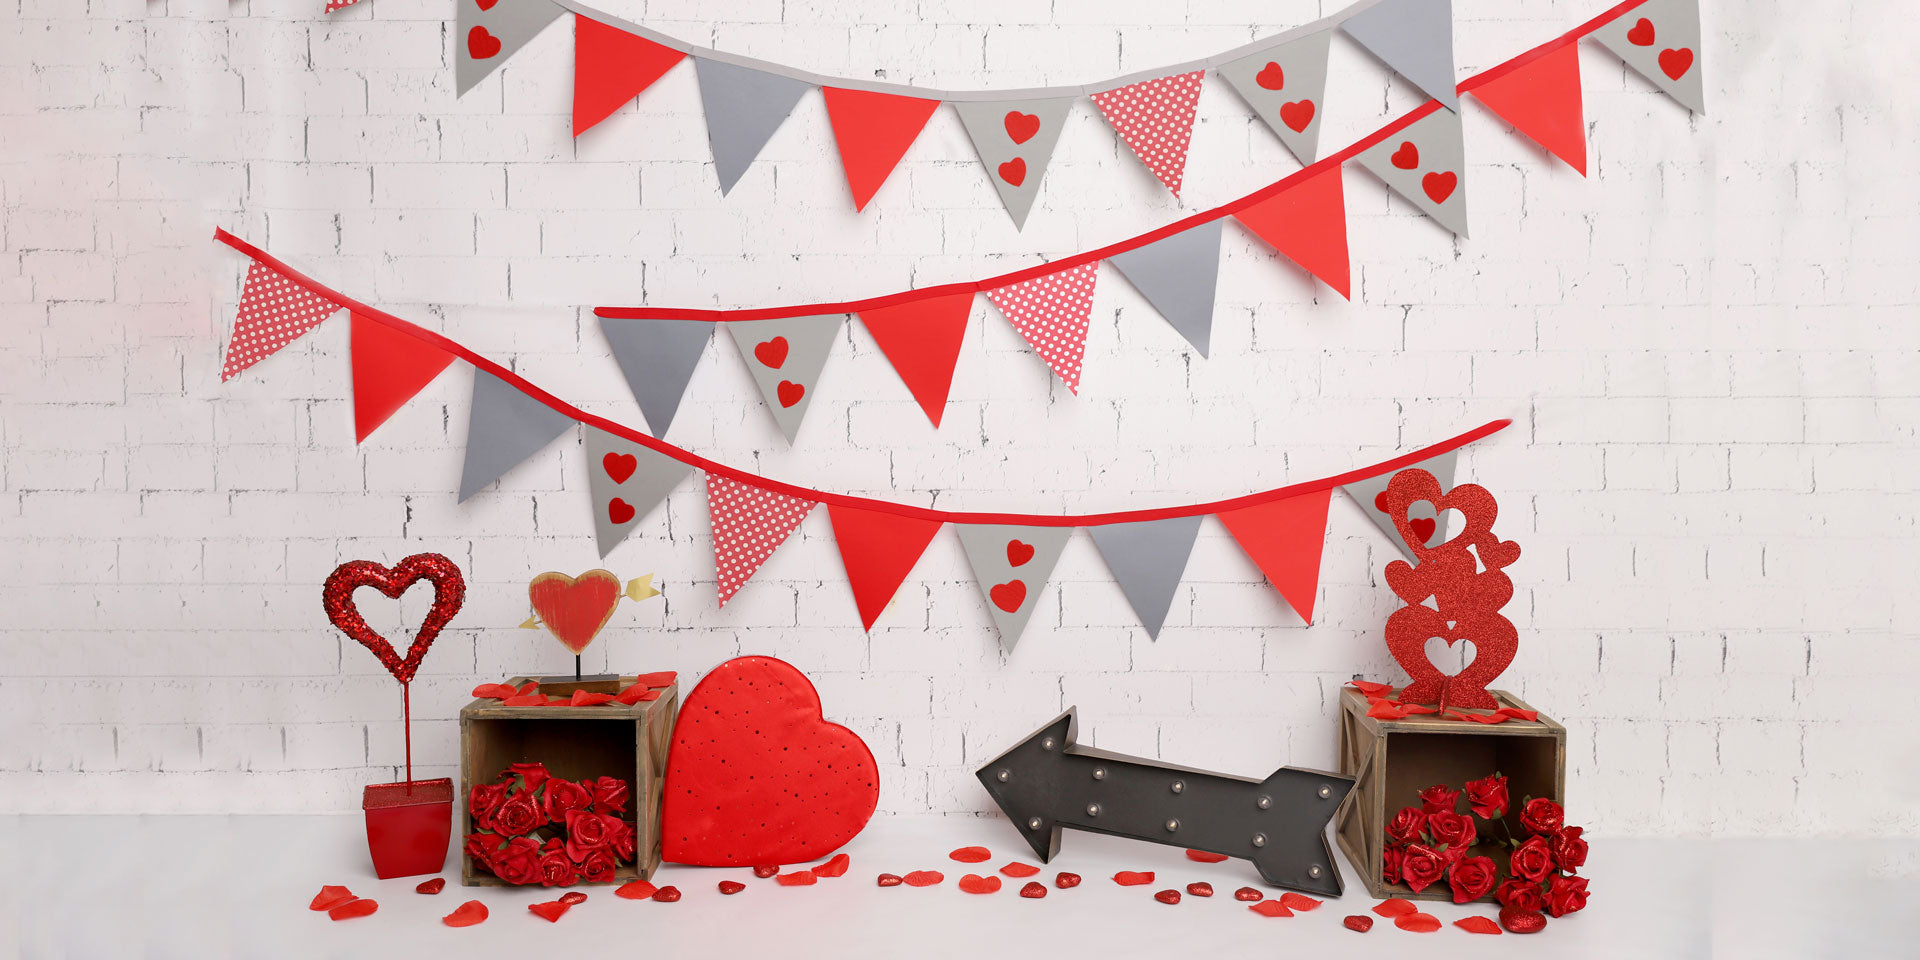 Kate Valentine's Day Party Backdrop Designed by Melissa King